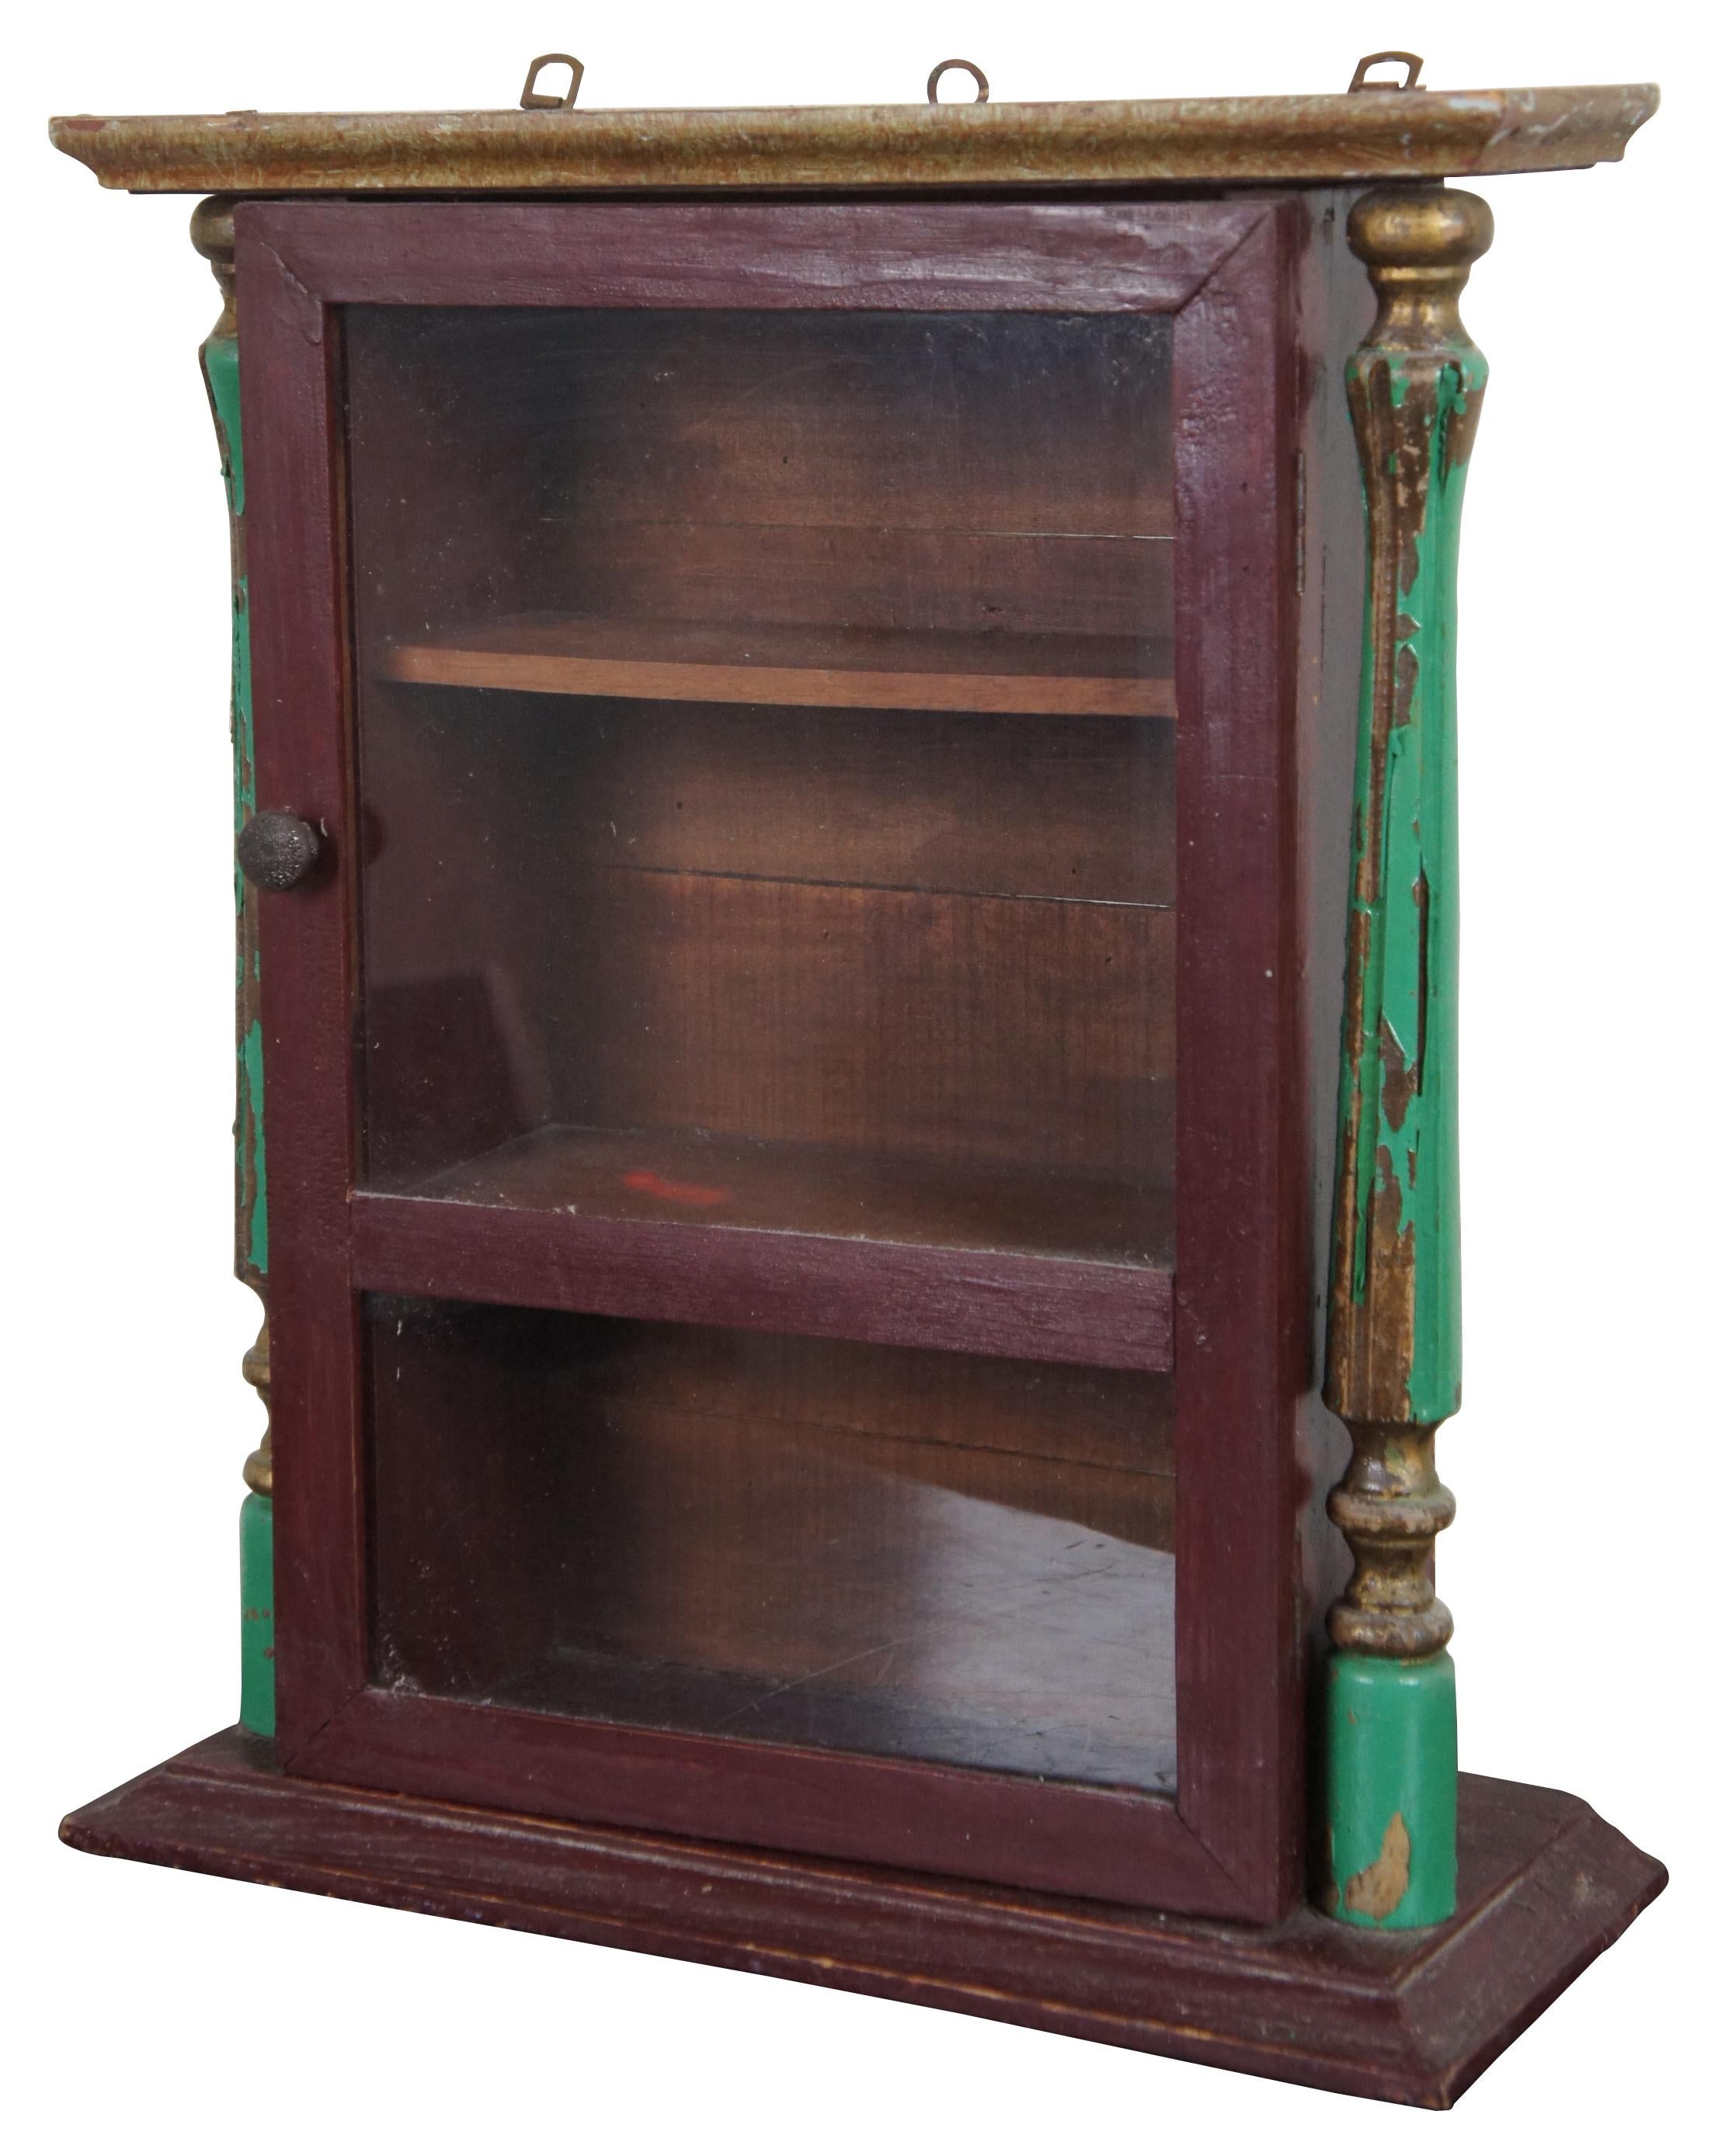 Primitive antique wooden wall cabinet painted dark red with a glass door and three shelves flanked by turned green painted columns. One side of the cabinet also sports an Art Deco floral motif. Measure: 18